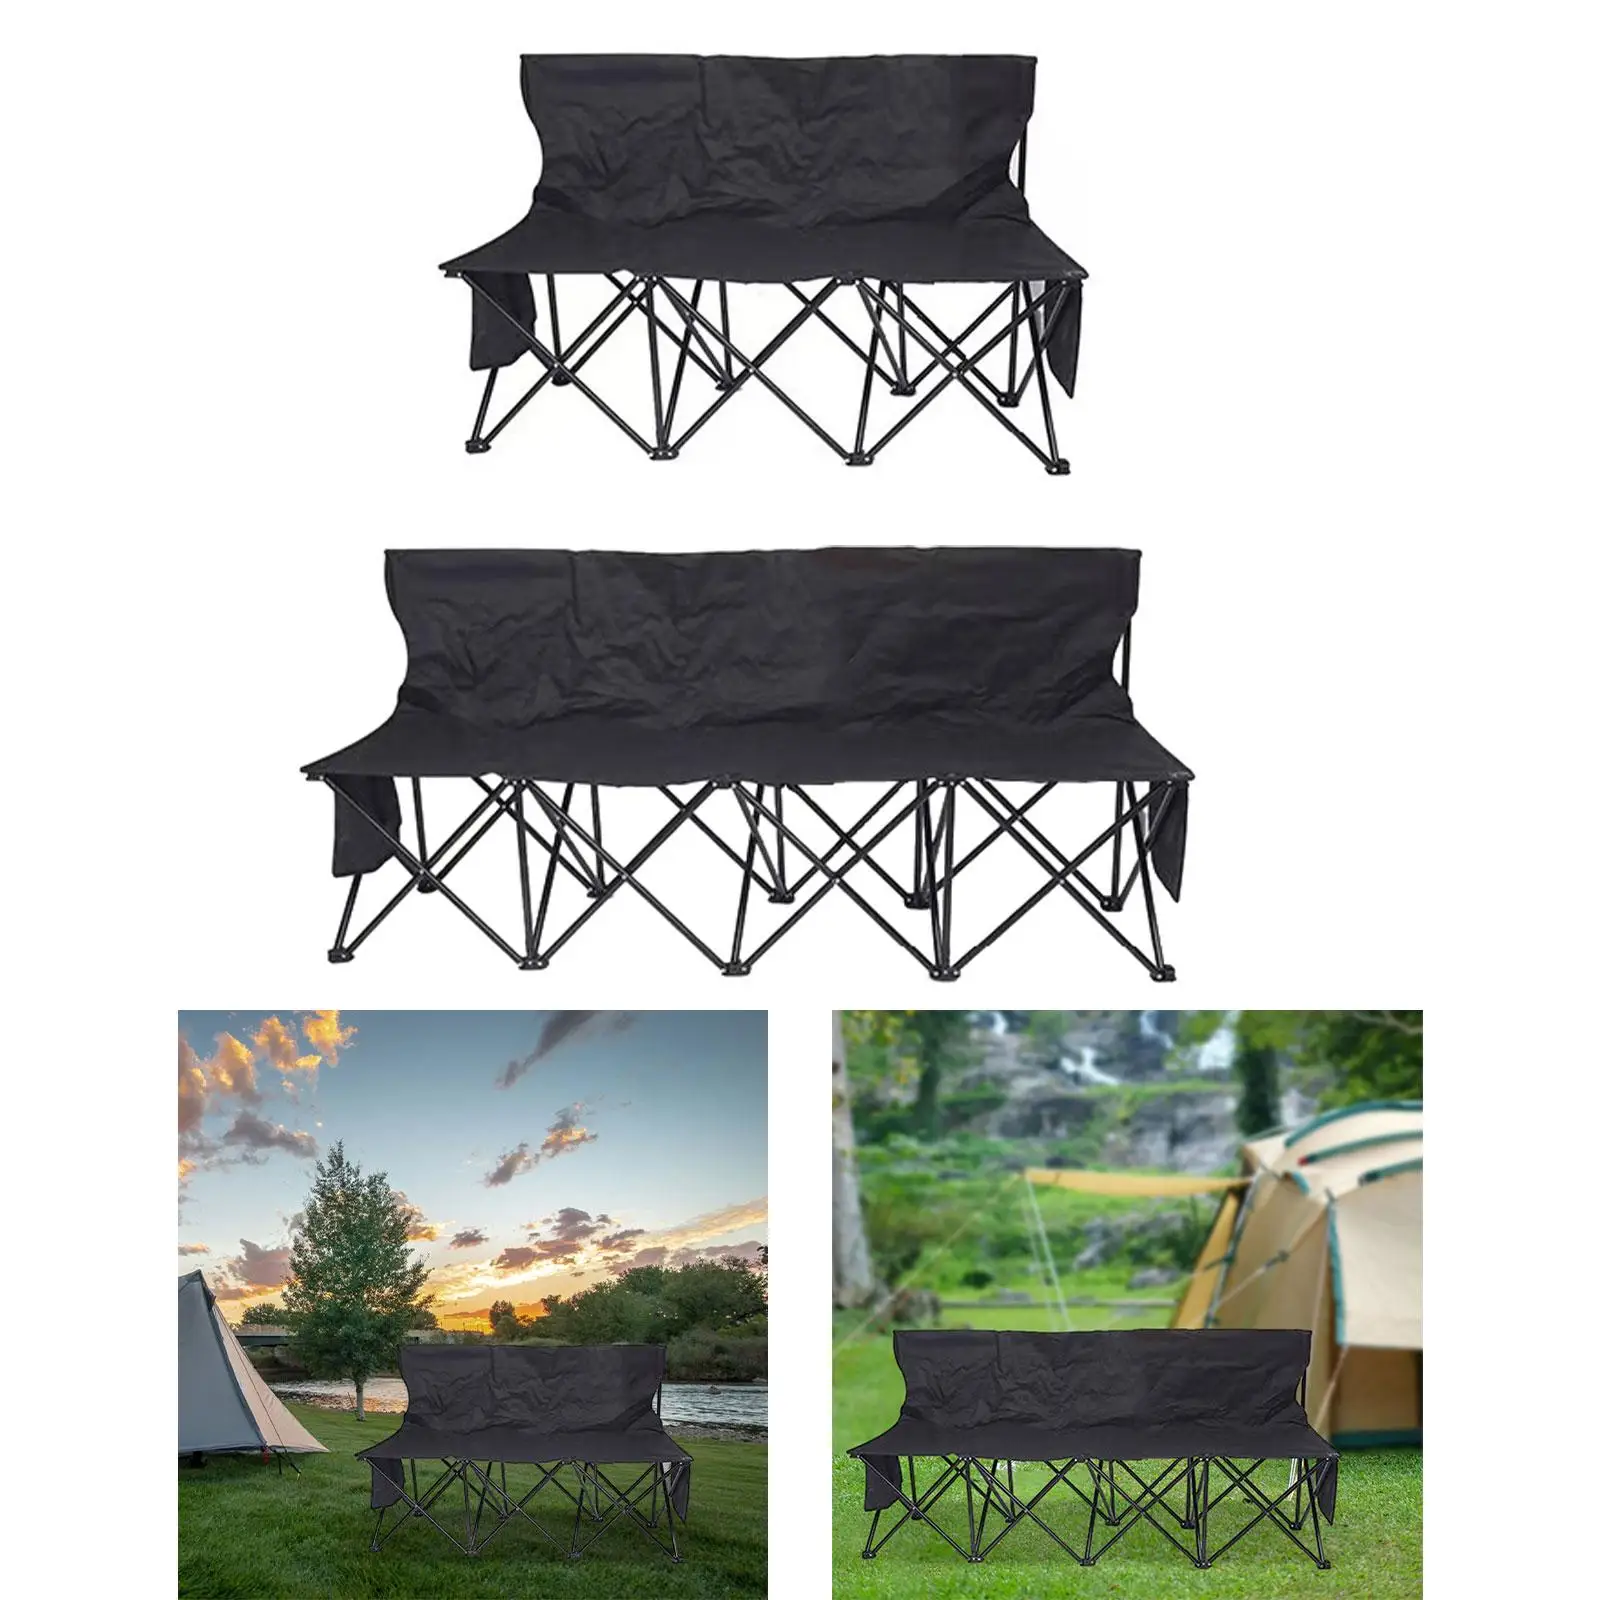 Folding Bench for Sports Team Lightweight Portable Sideline Bench Foldable for Campsites Picnic Outdoor Events Soccer Football